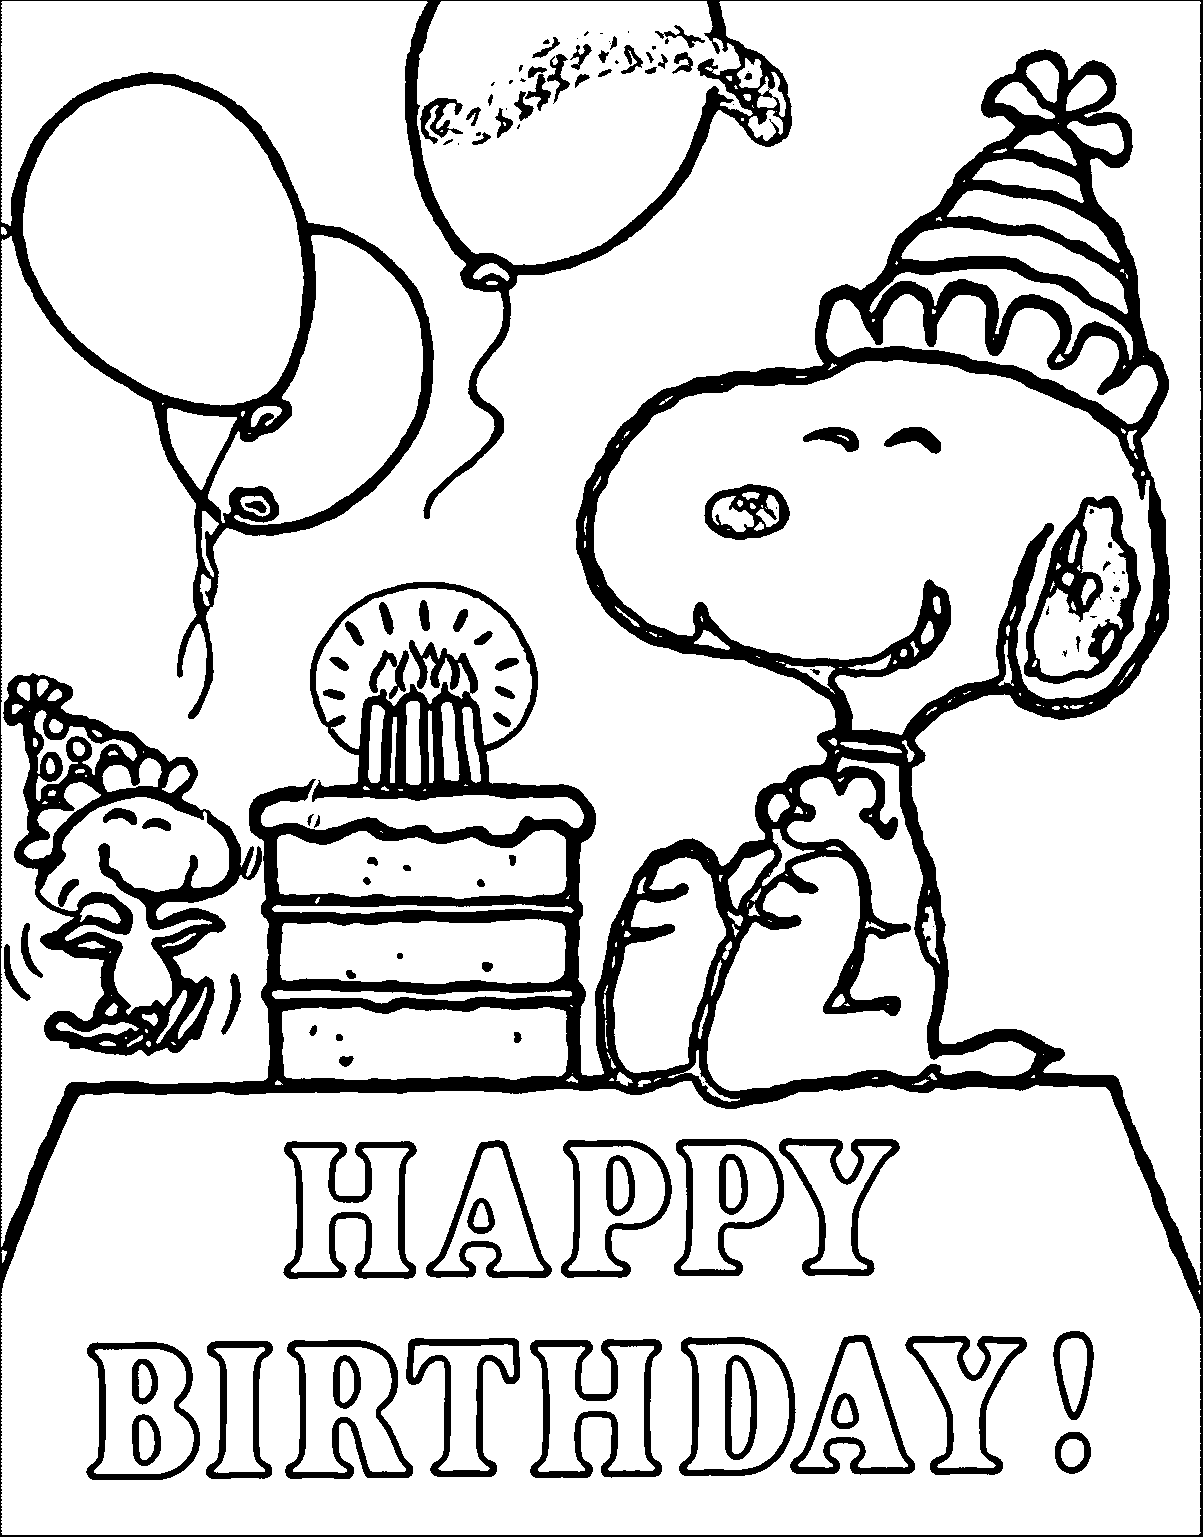 Snoopy and Birthday cake Coloring Pages